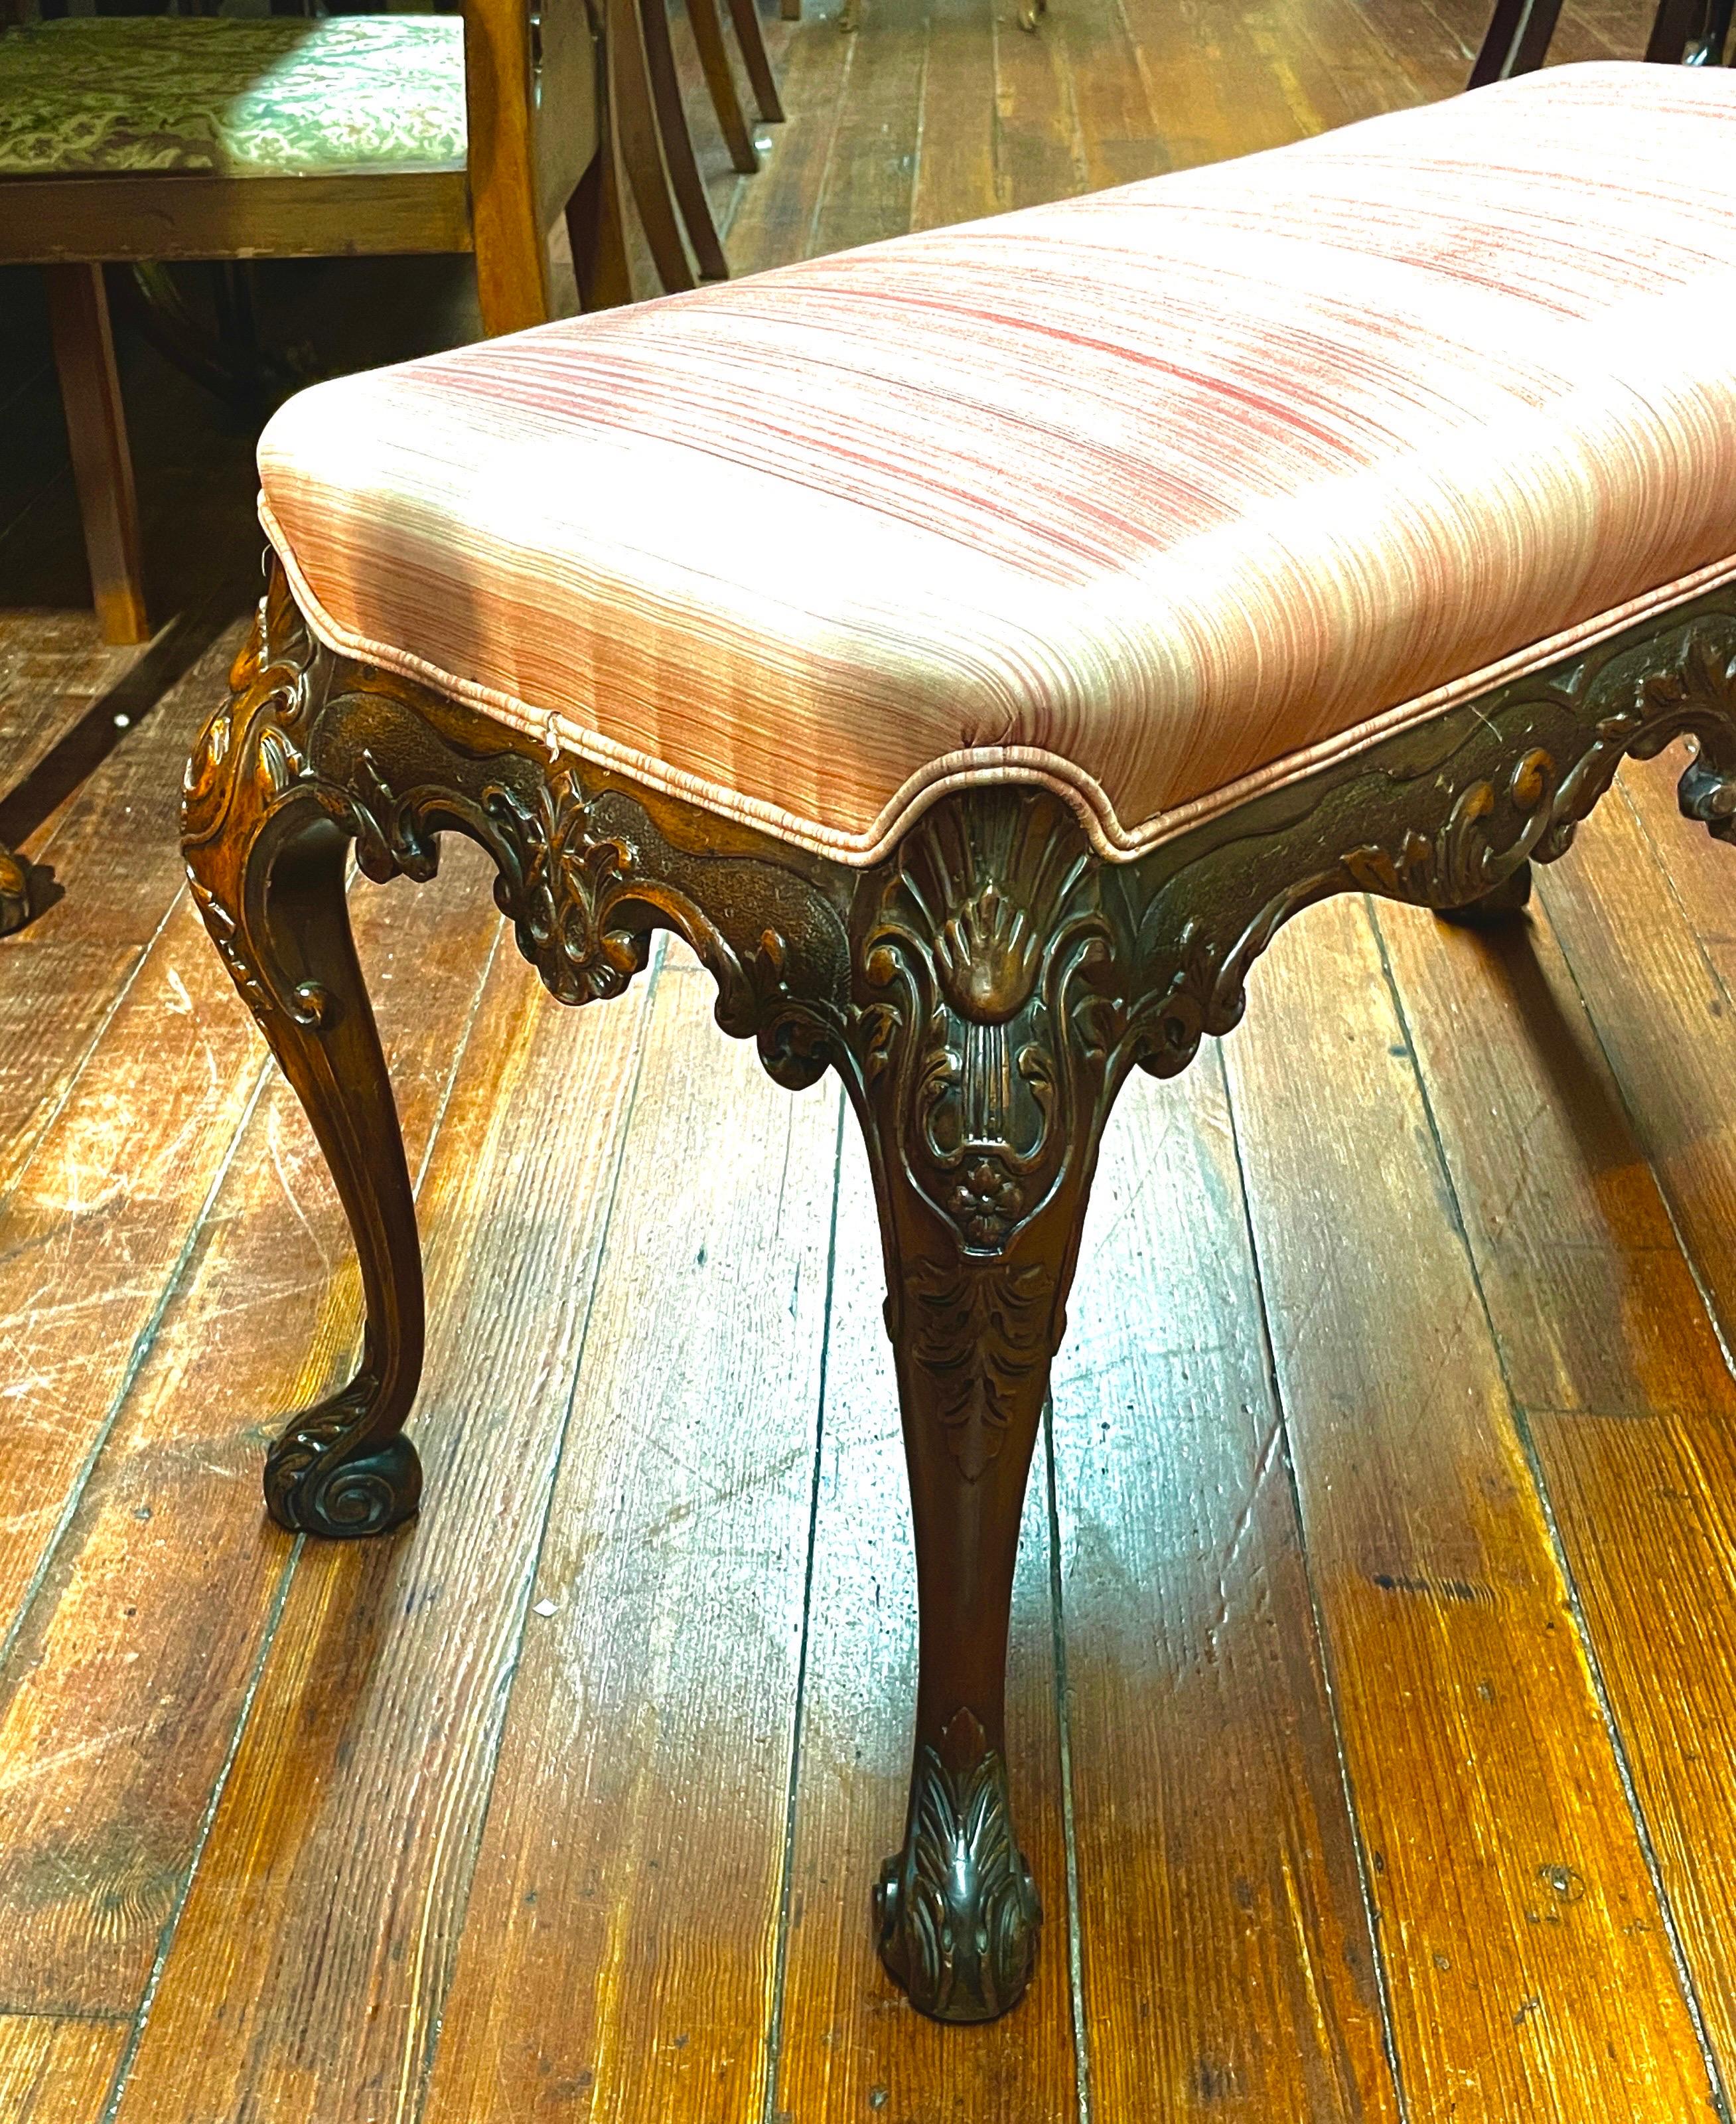 Superb Quality Antique English hand carved solid mahogany Georgian style Bedside or Fireside Bench. The hand carved frame is extraordinarily well done with superb details including the scrolled feet and cartouches each side. The fabric is a rose cut